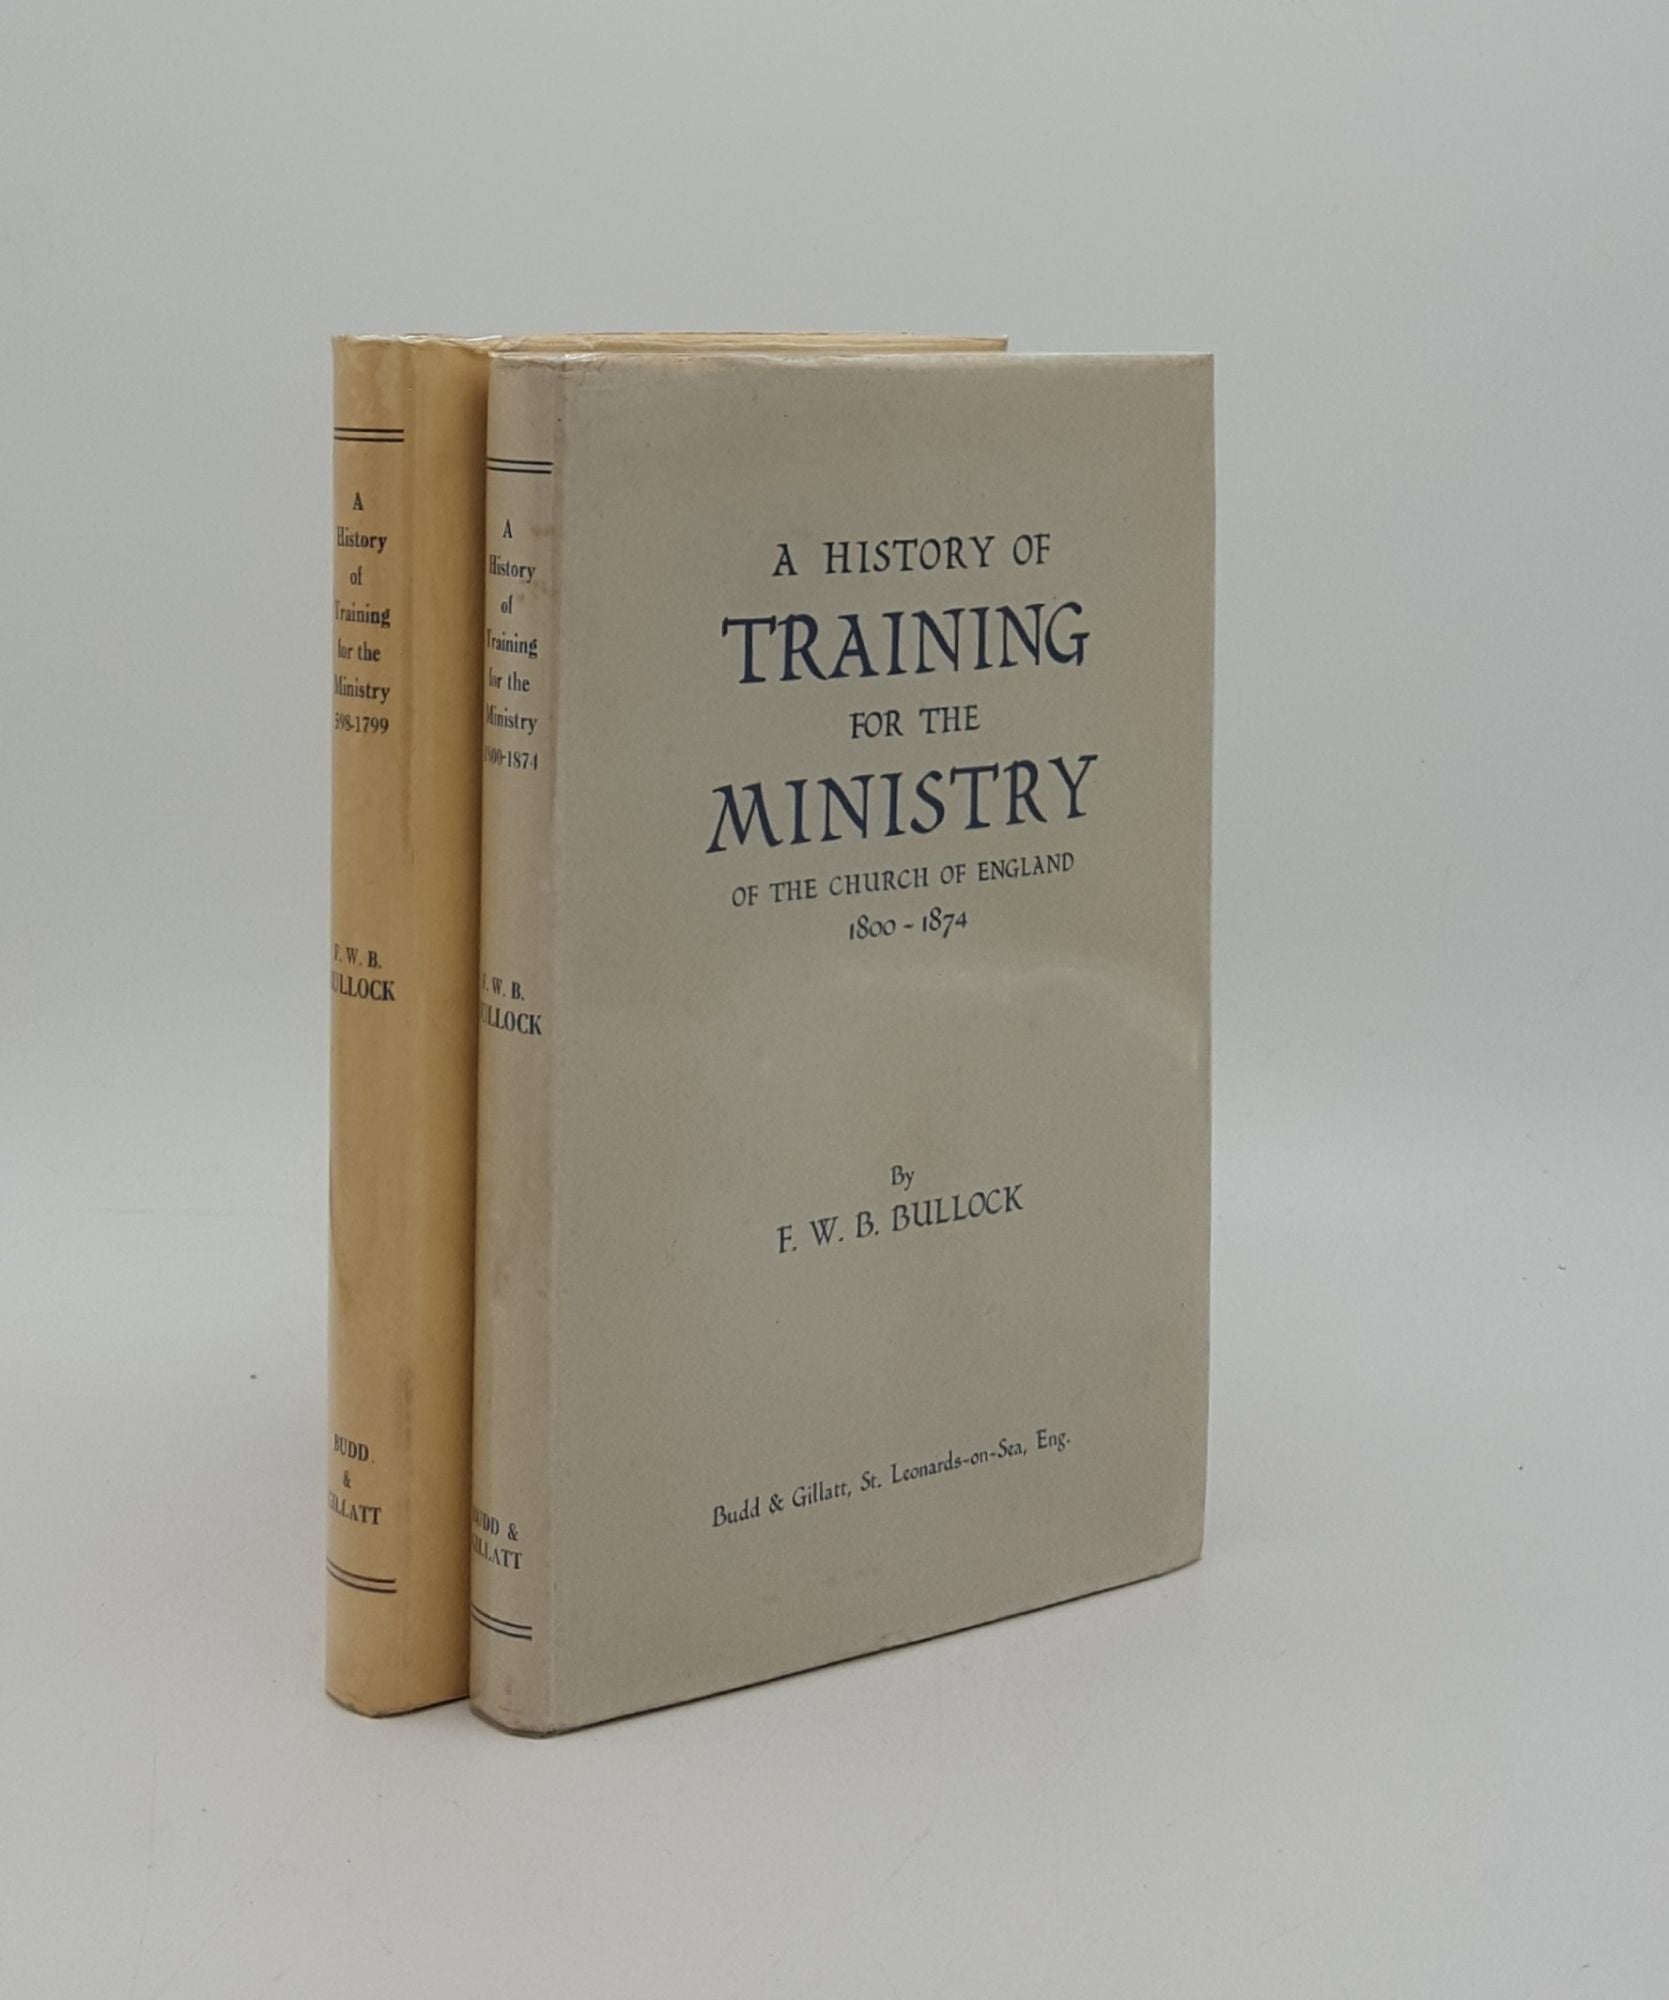 BULLOCK F.W.B. - A History of Training for the Ministry of the Church of England 1800-1874 [&] 598-1799